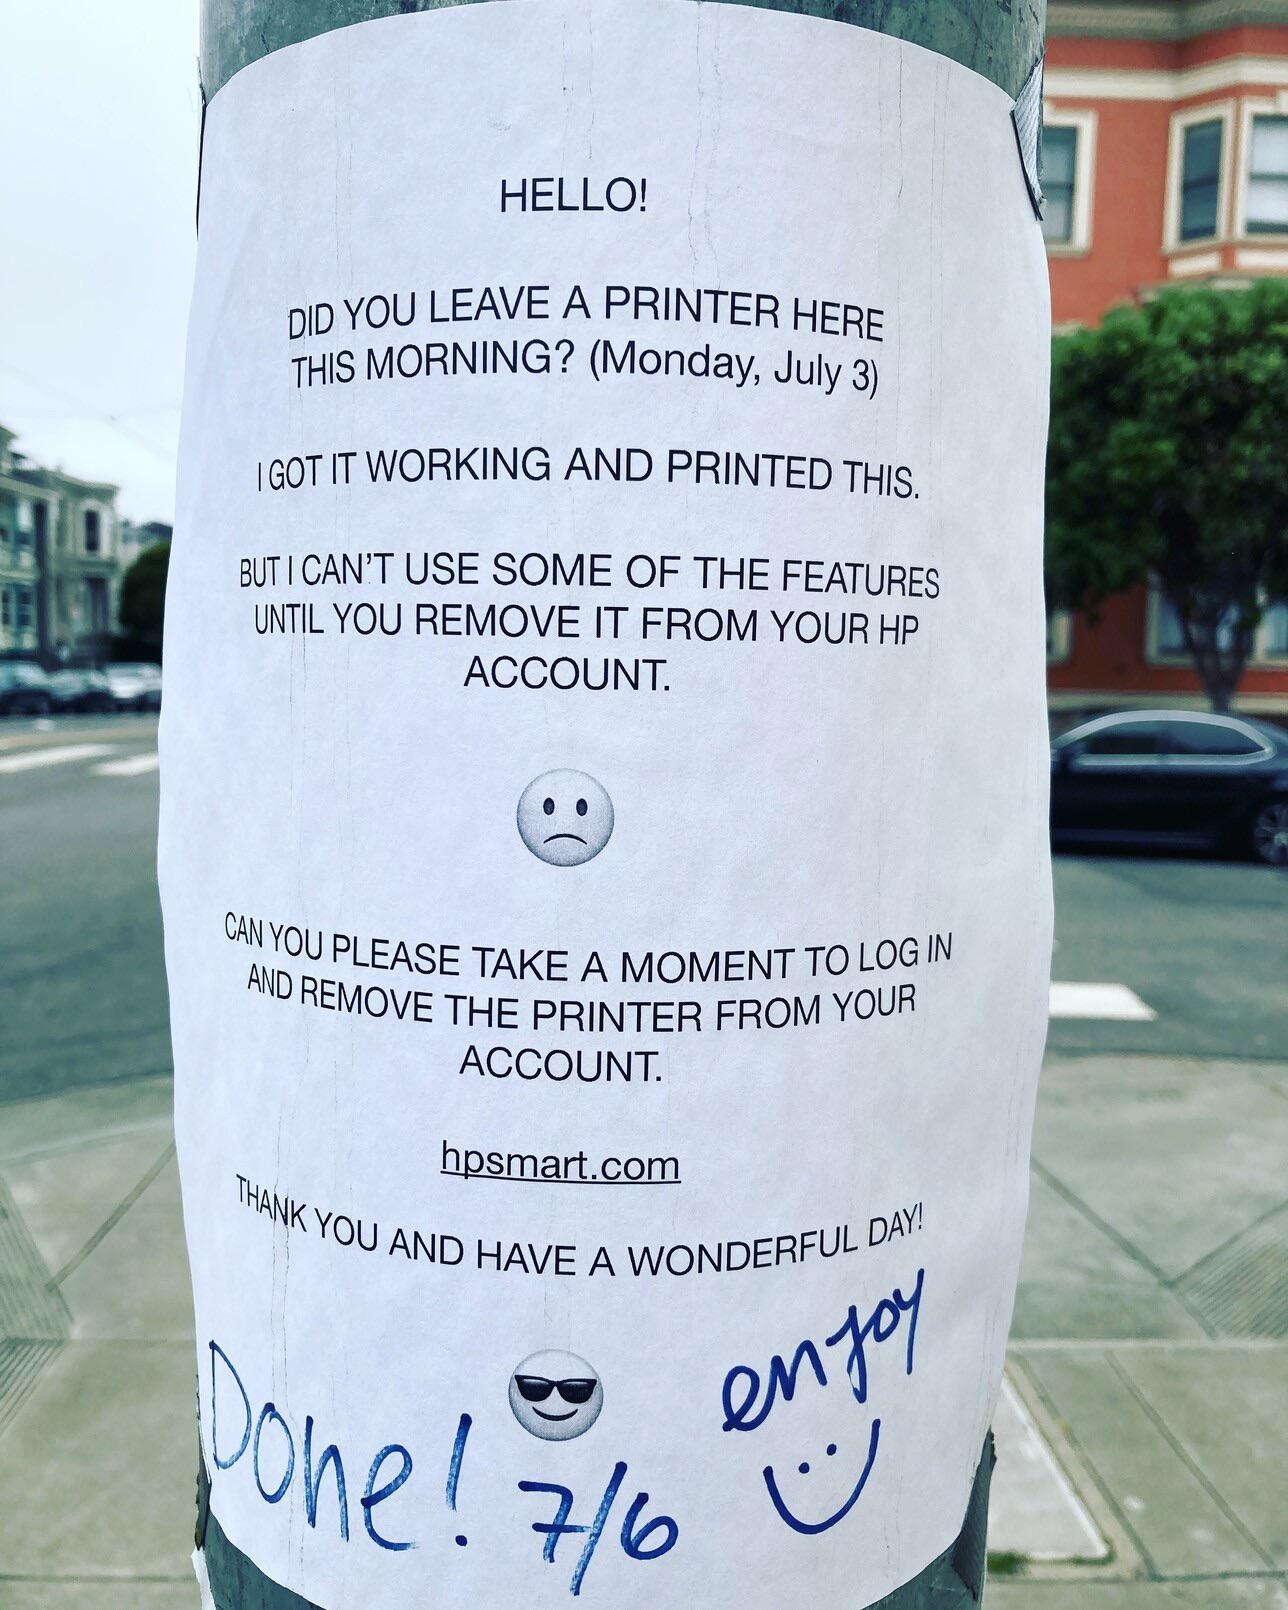 A note on a street pole asking whoever left a free printer there to remove it from their account because they got it to work (and printed the note) but can&#x27;t use all the features, with &quot;thank you, have a wonderful day,&quot; and someone writes &quot;Done! Enjoy&quot;